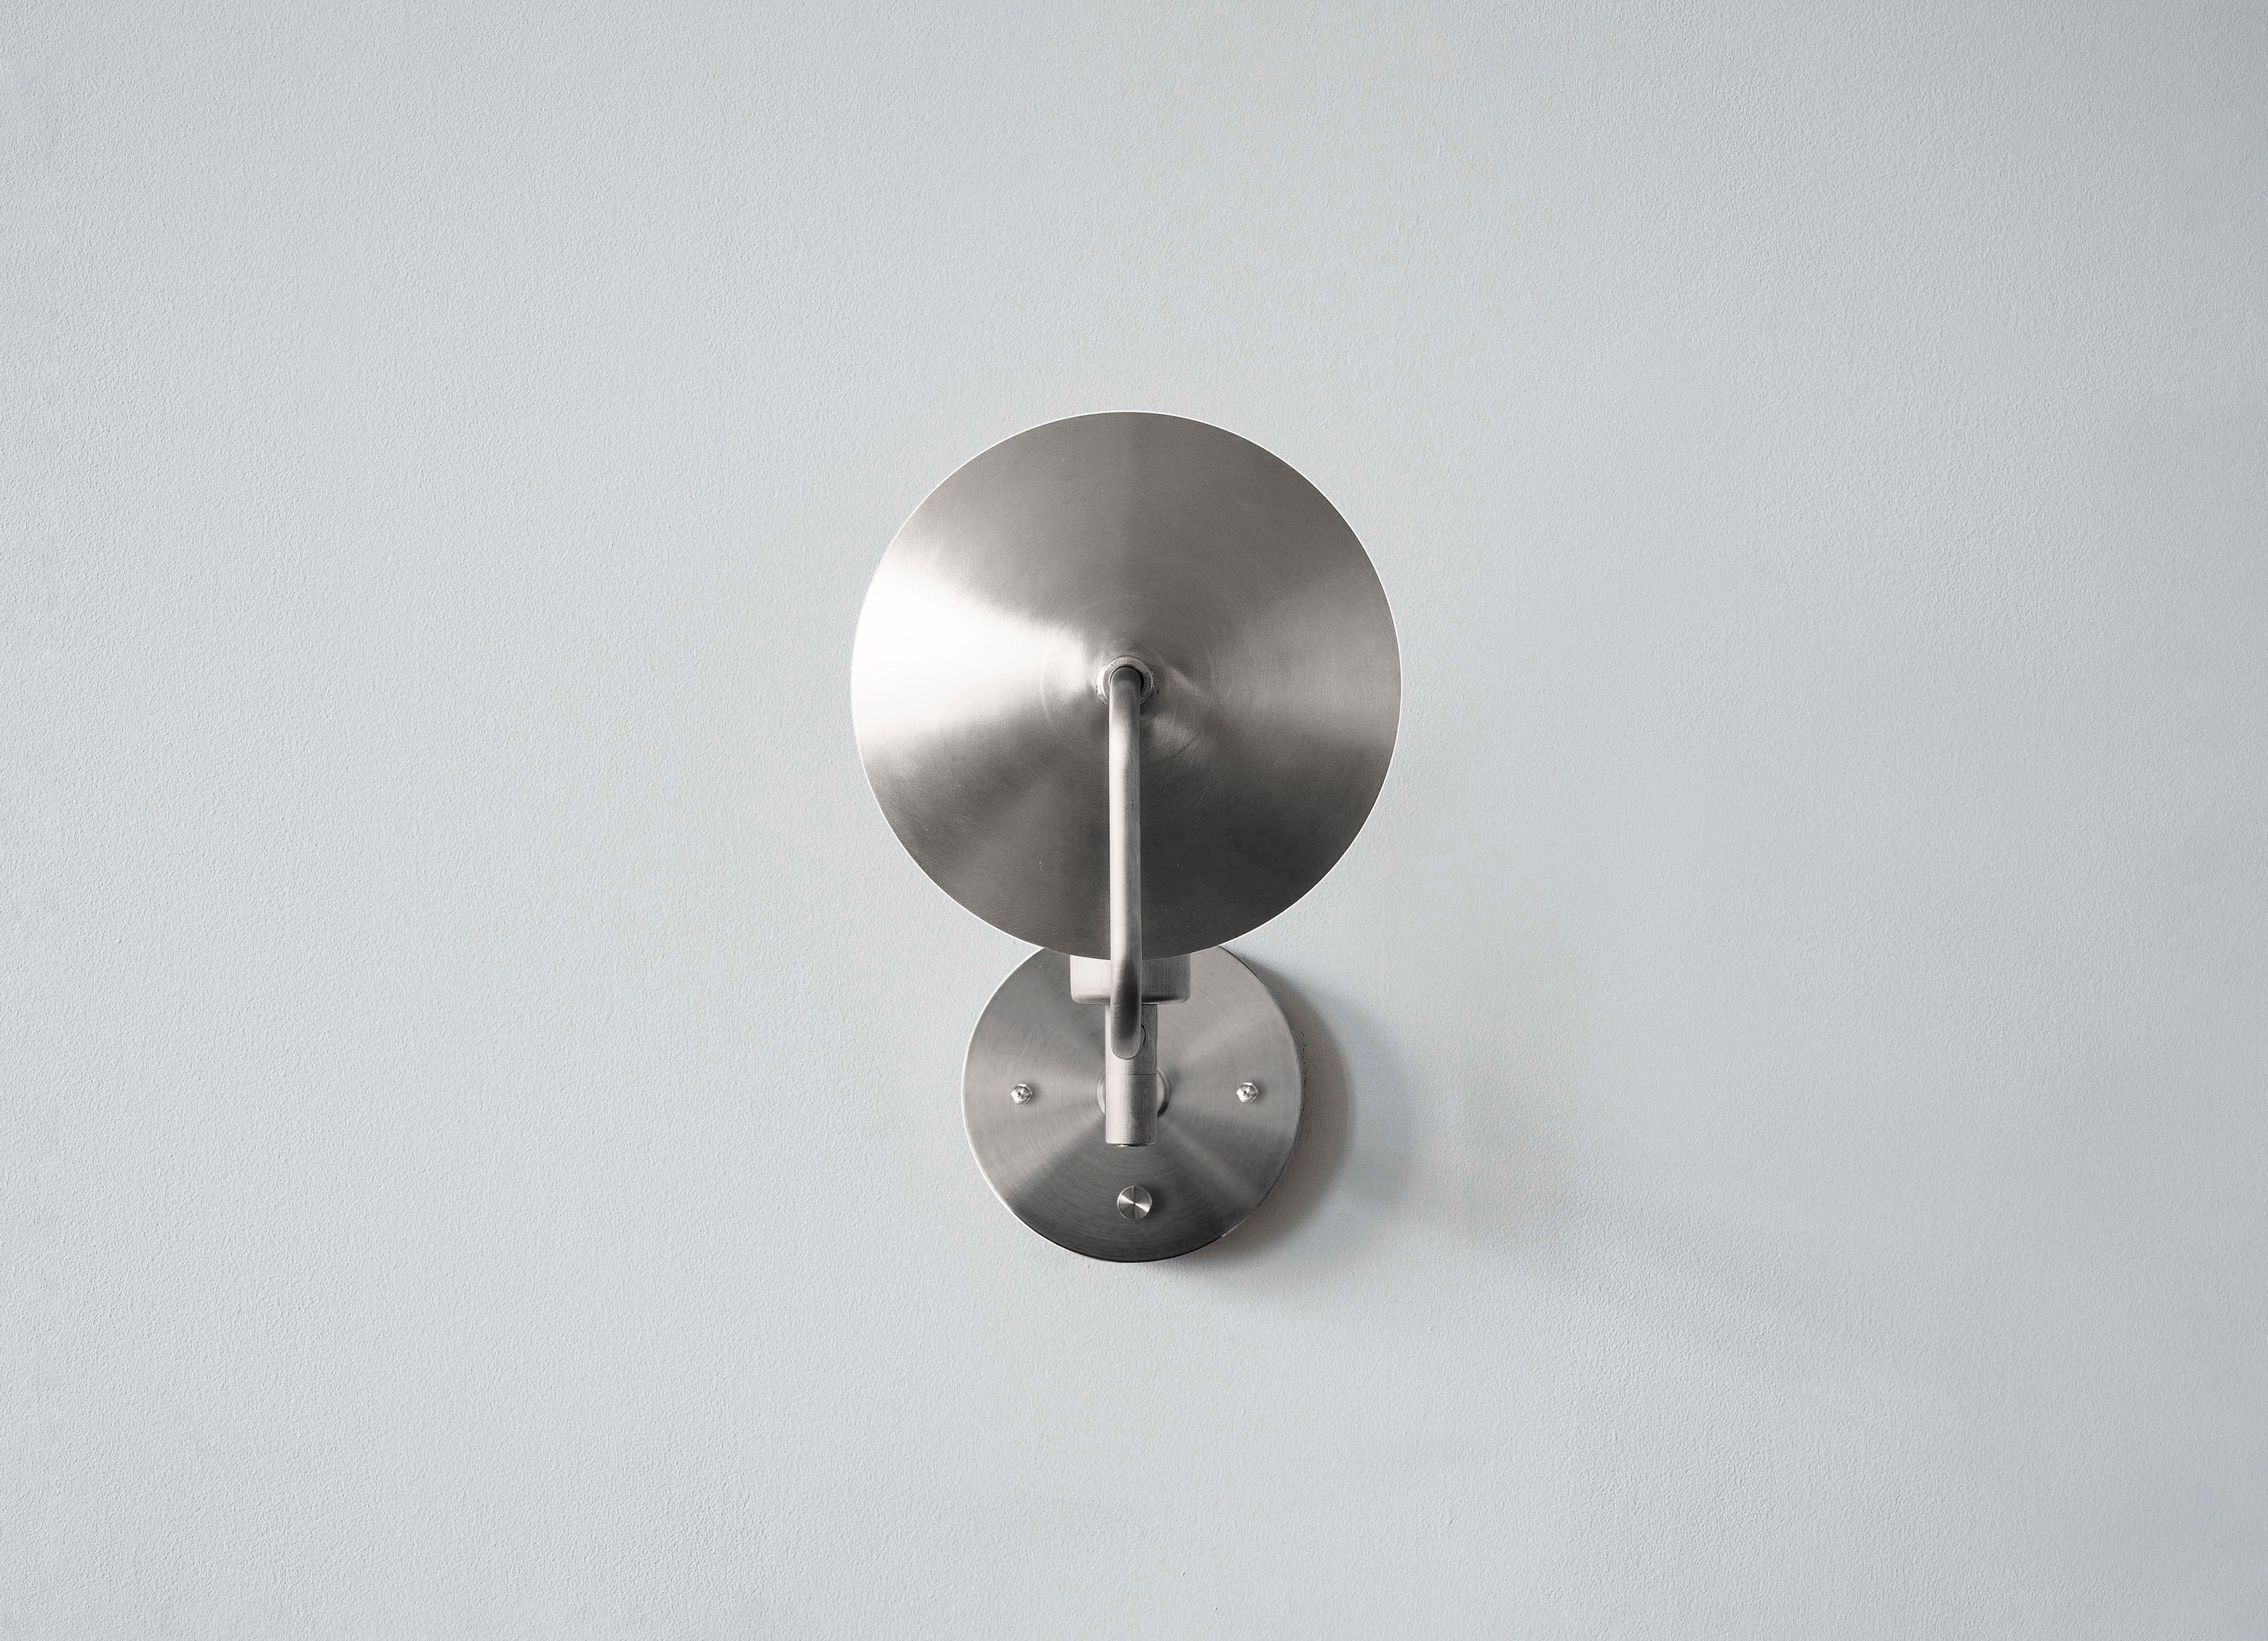 The orbit sconce is a modern interpretation of an early American candle form with a reflective spun brass disc rotating 320 degrees, the sconce can act as both a reflector and deflector of light. The most elemental piece of the Orbit series, the